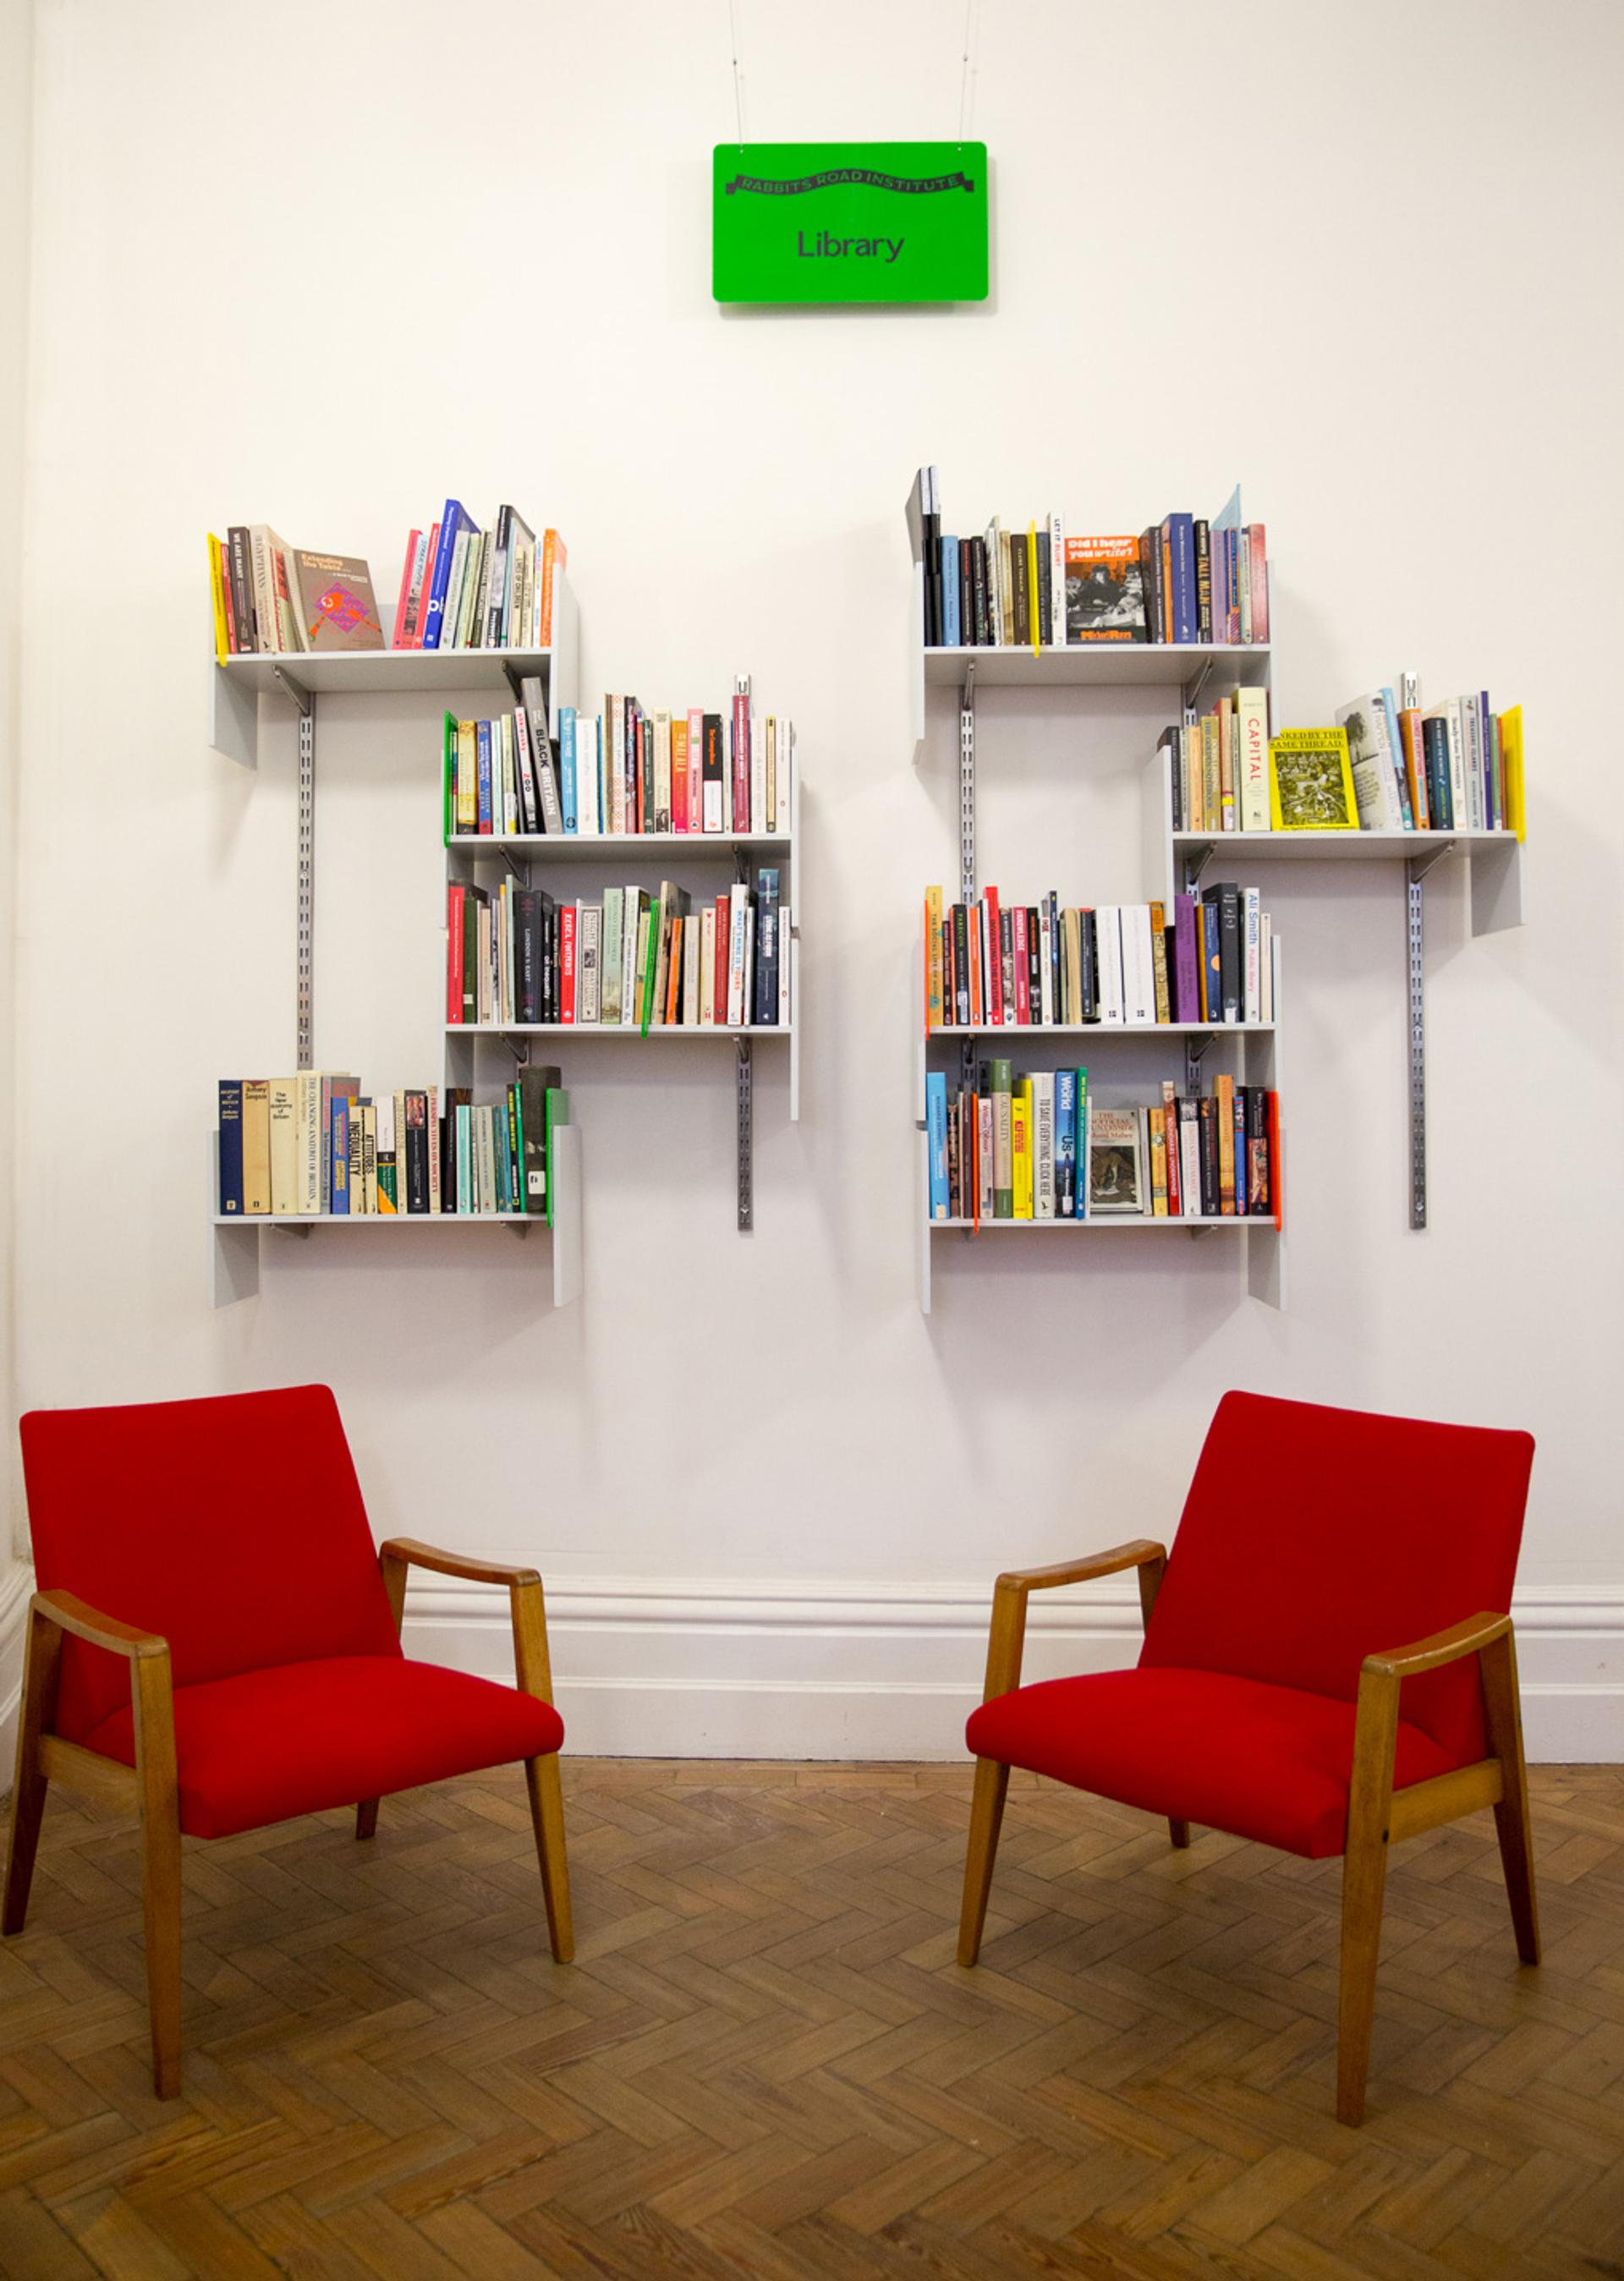 Eight wall mounted shelves full of books on a white wall; a green sign with the word 'Library' hangs above; in the foreground, two red midcentury lounge chairs. 